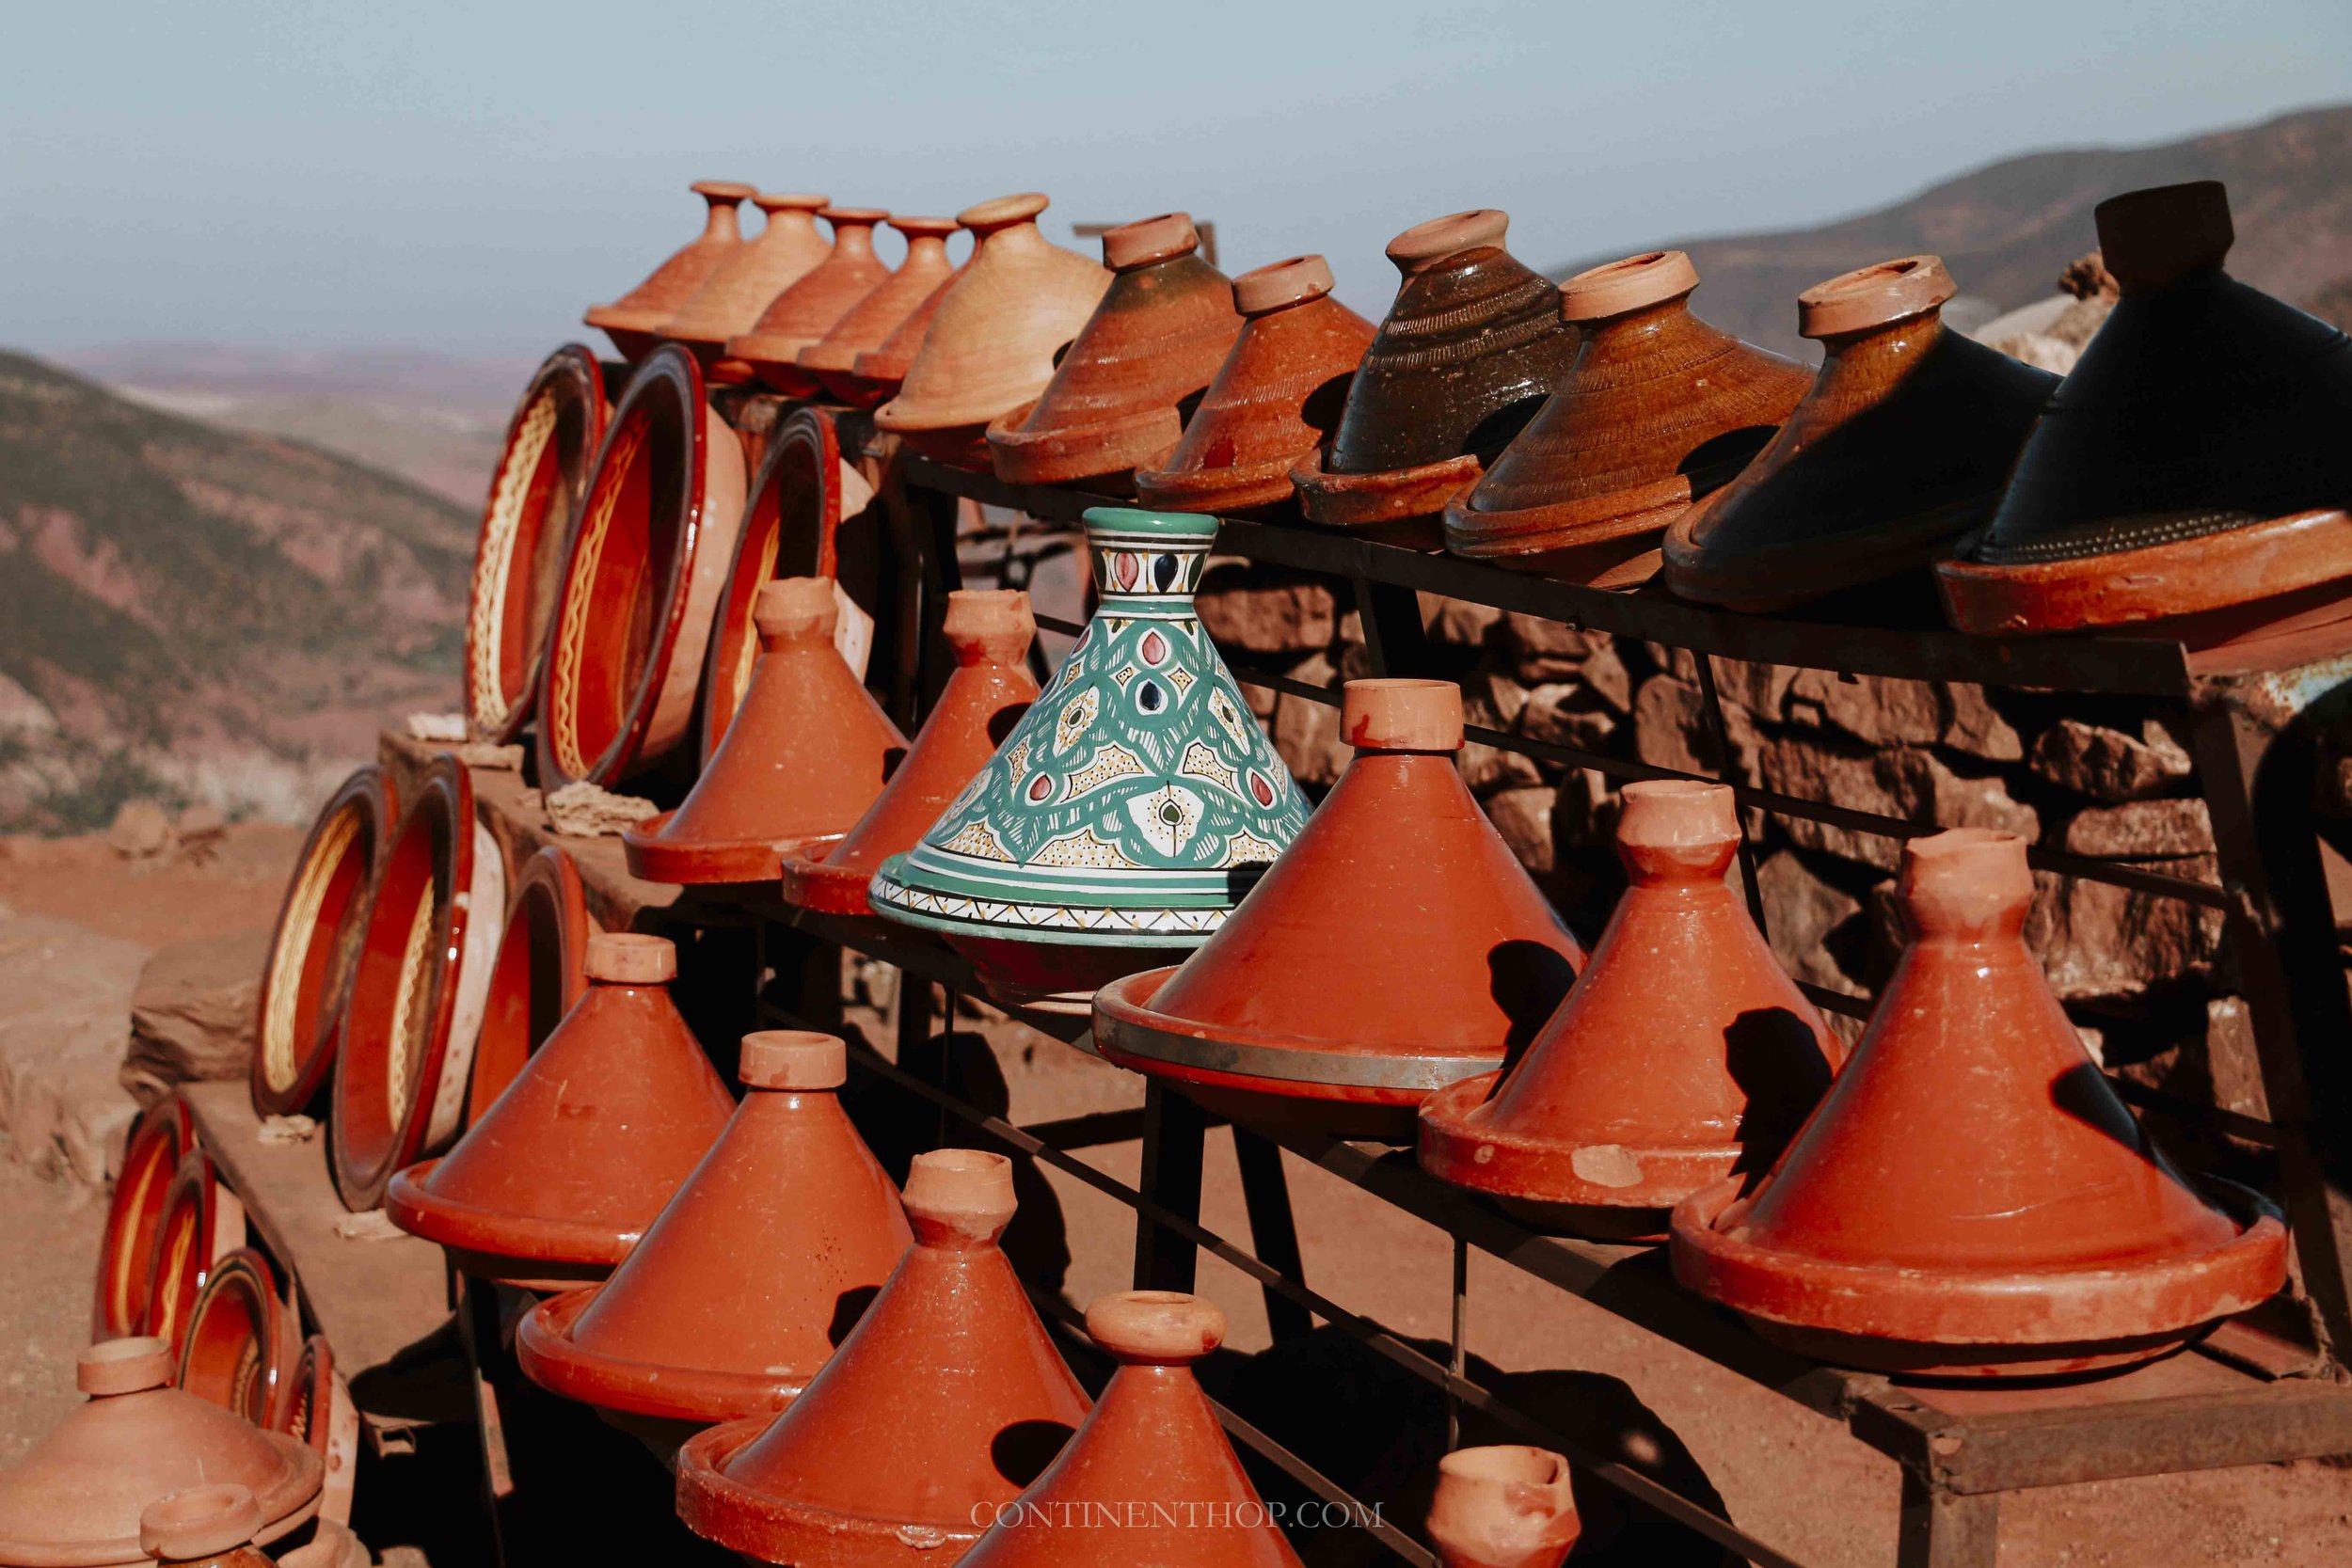 Tagines for sale by the road on a morocco desert trip